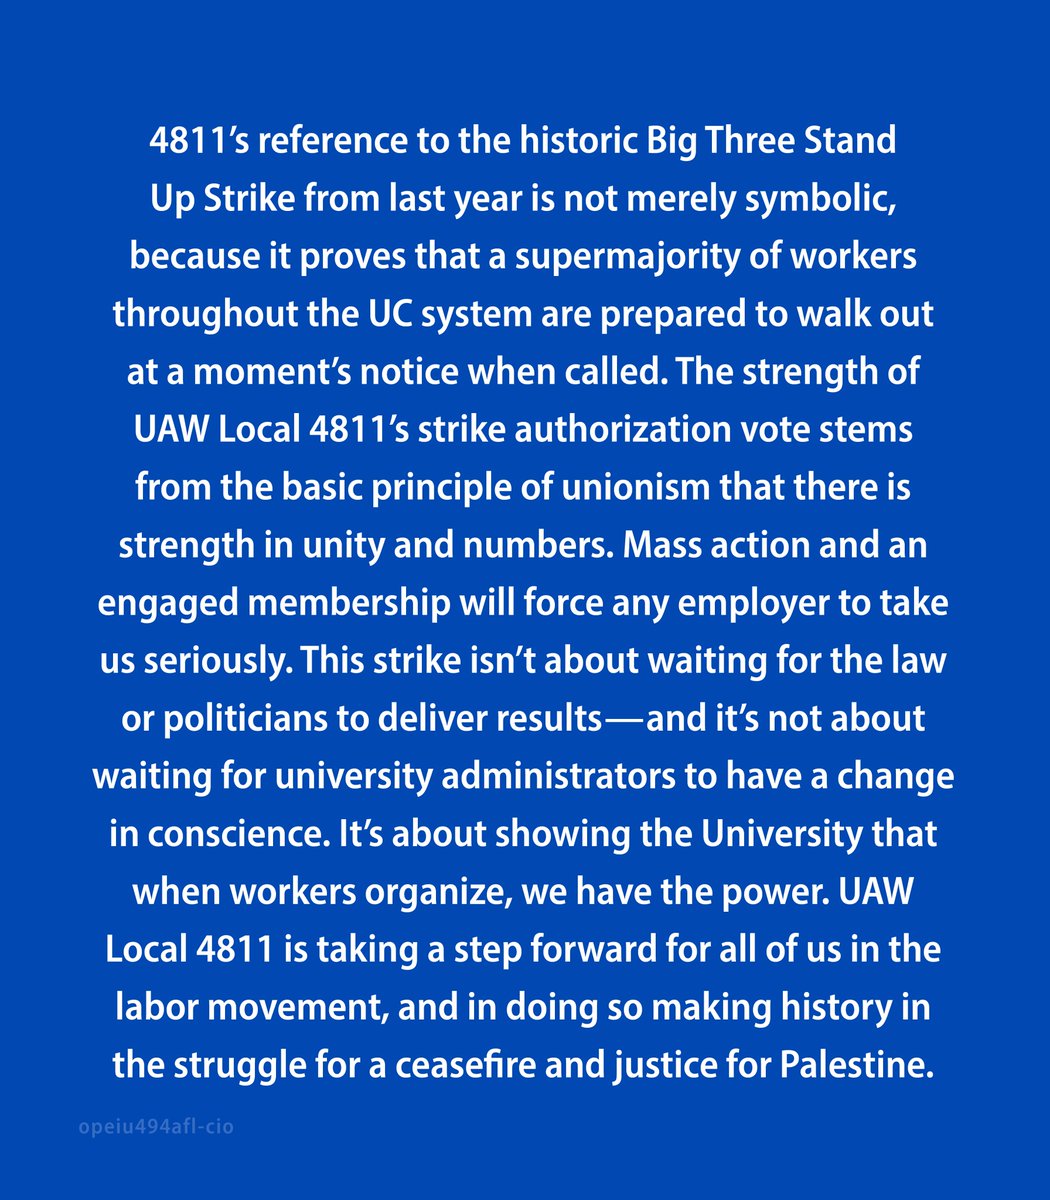 We stand in solidarity with the members of @uaw_4811 who have authorized their union to call for a strike in response to unprecedented attacks on workers' rights to free speech. This is a step forward for all of us in the labor movement and the struggle for justice in Palestine.